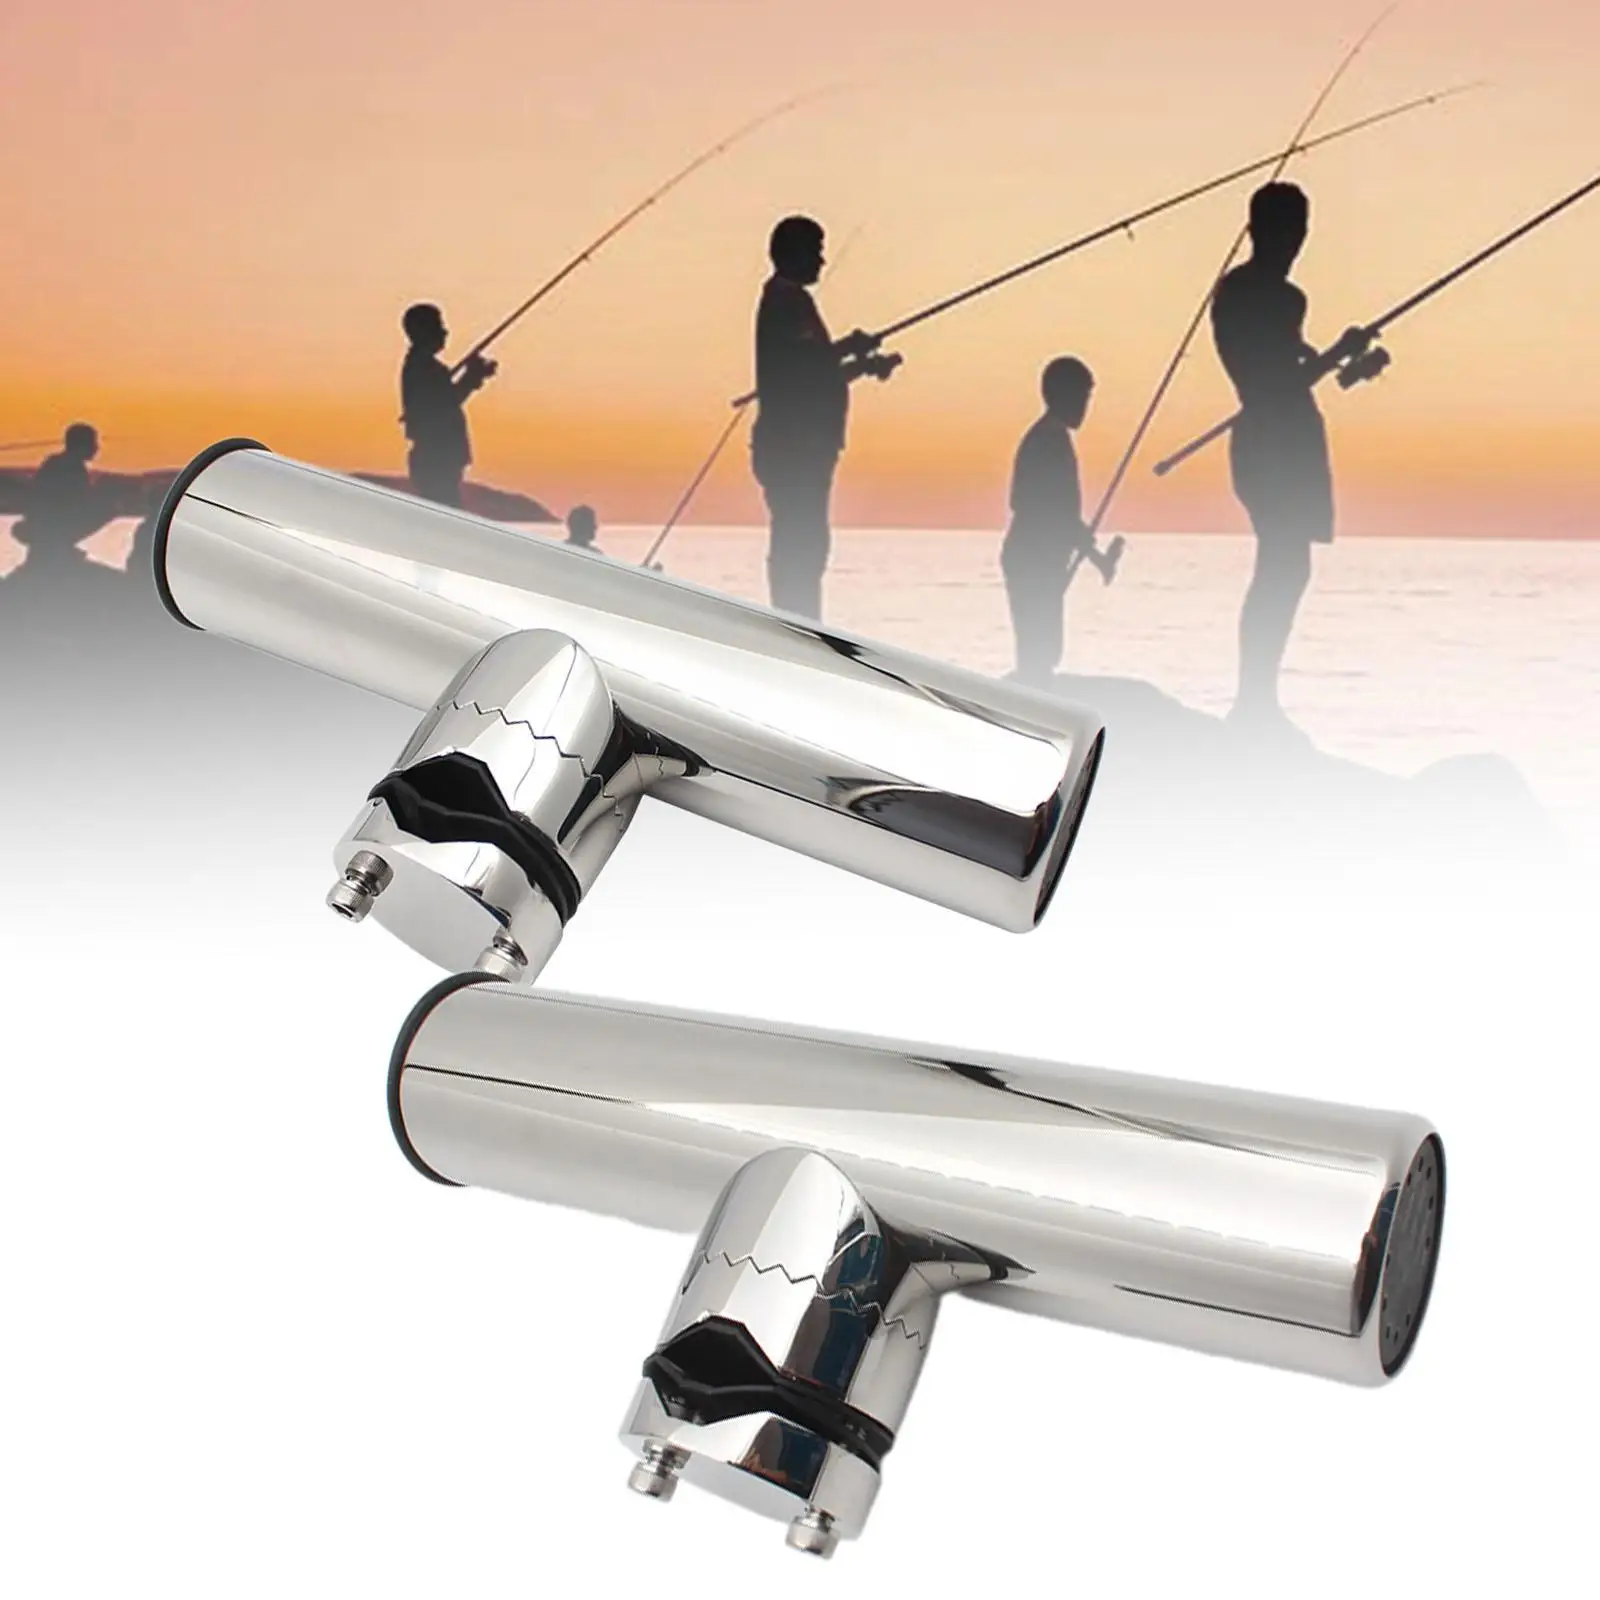 Rail Mount Rod Clamp Holder Fishing Kayak Boat Accessories Easy Installation Stainless Steel Clamp on Rod Holder Bracket Support